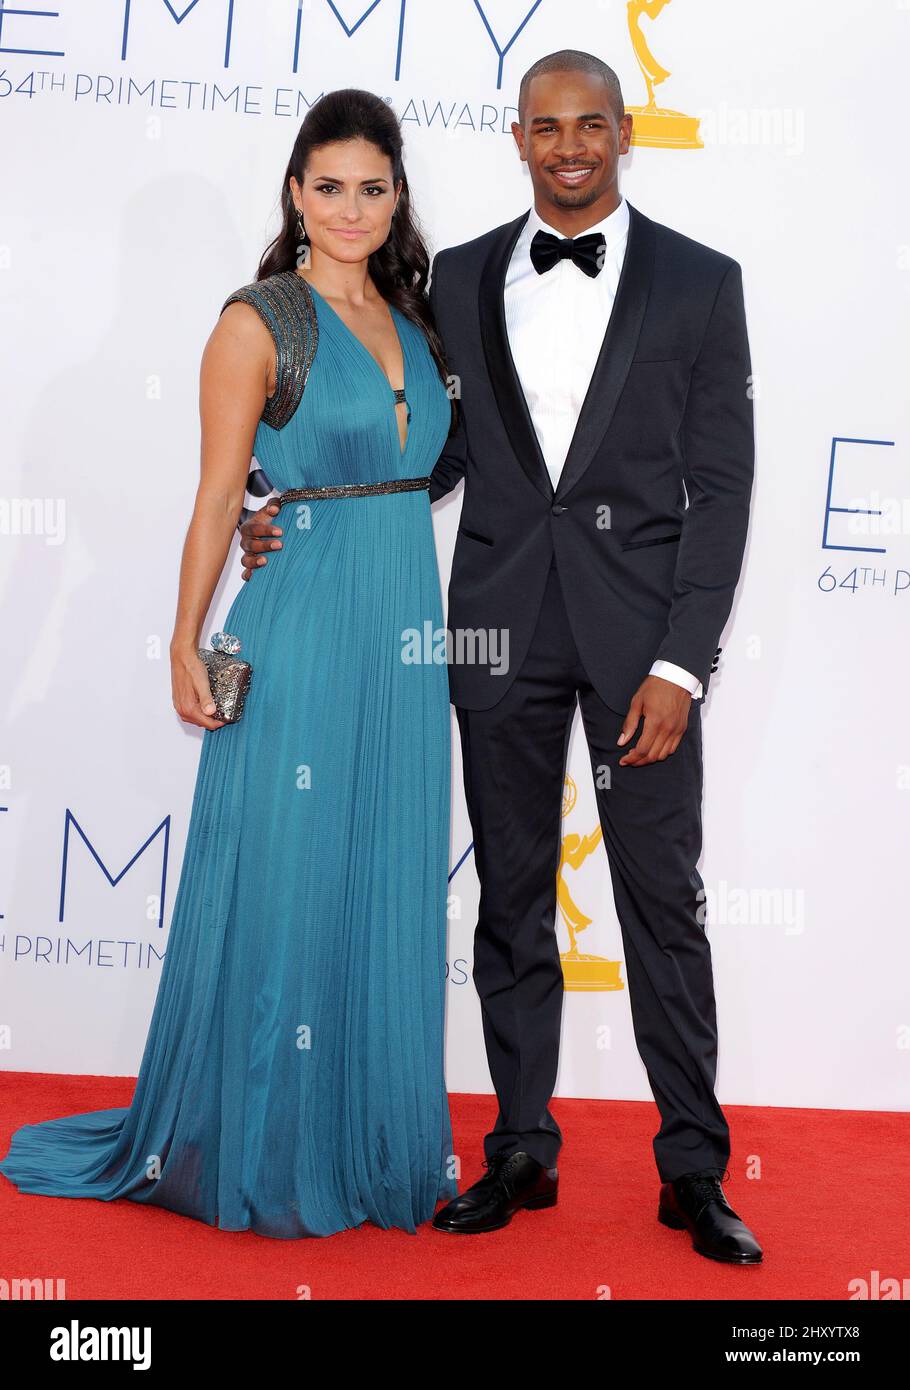 Damon Wayans Jr. attends the 64th Primetime Emmy Awards held at the Nokia Theatre, Los Angeles. Stock Photo